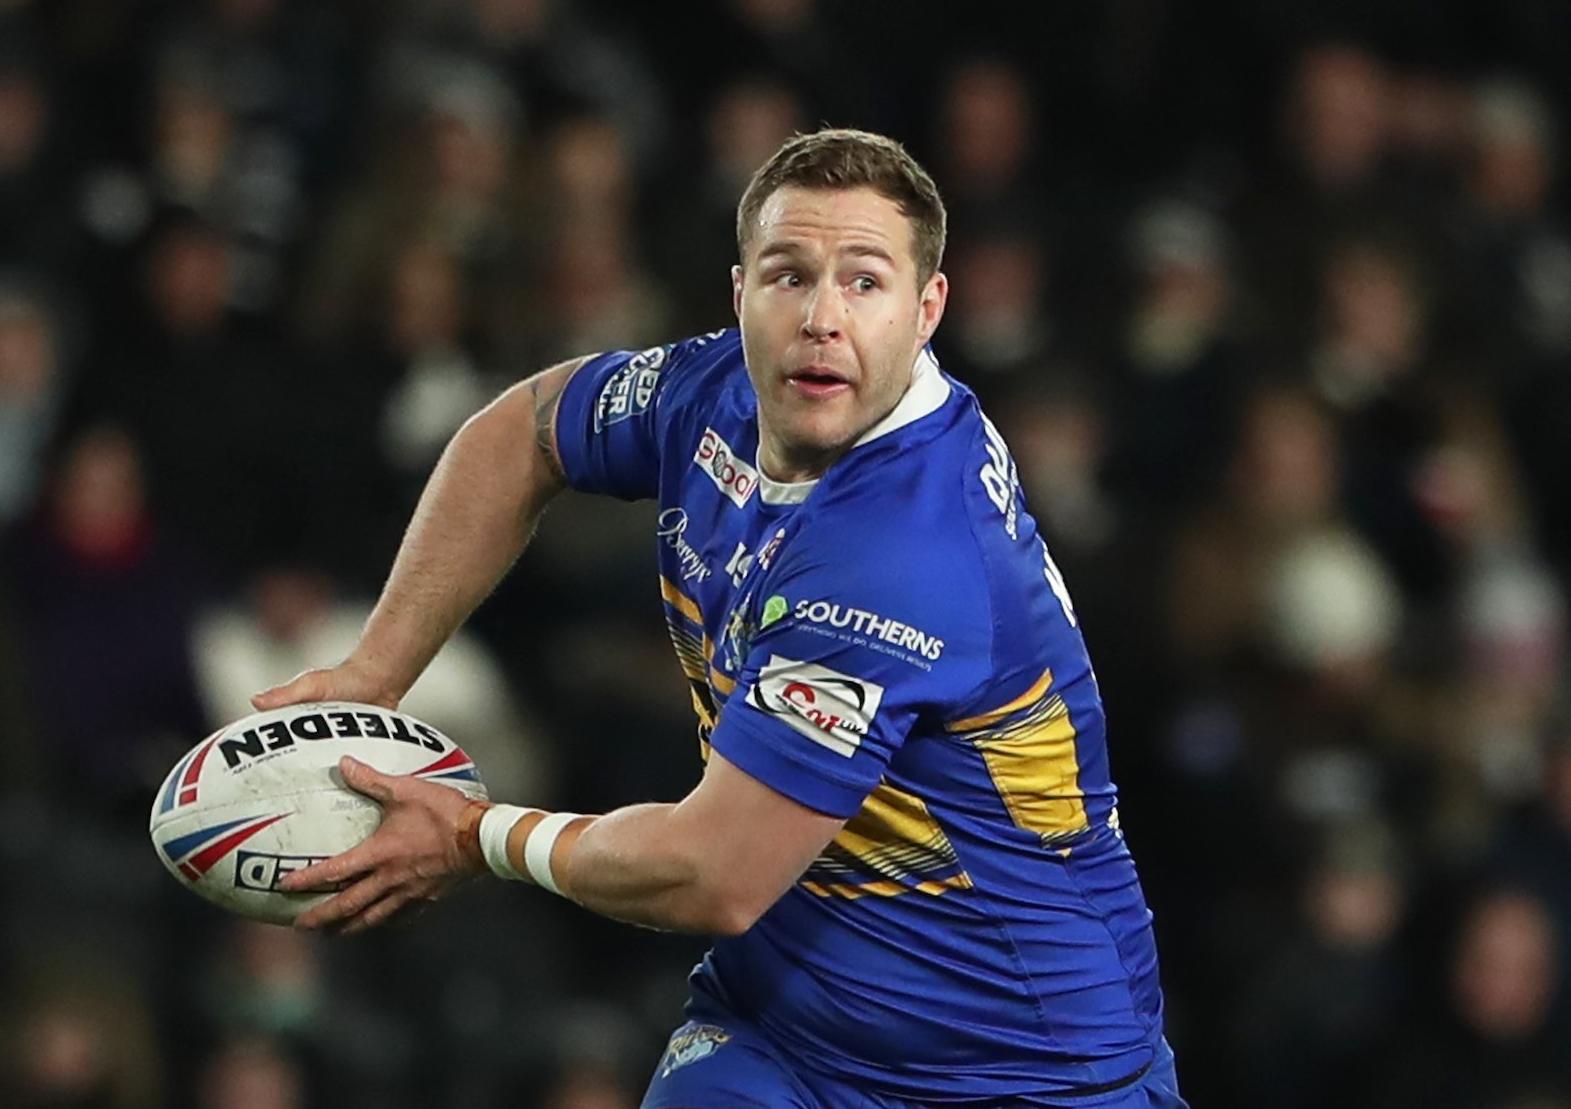 OUTGOING: Leeds Rhinos' Trent Merrin. Picture by Ash Allen/SWpix.com